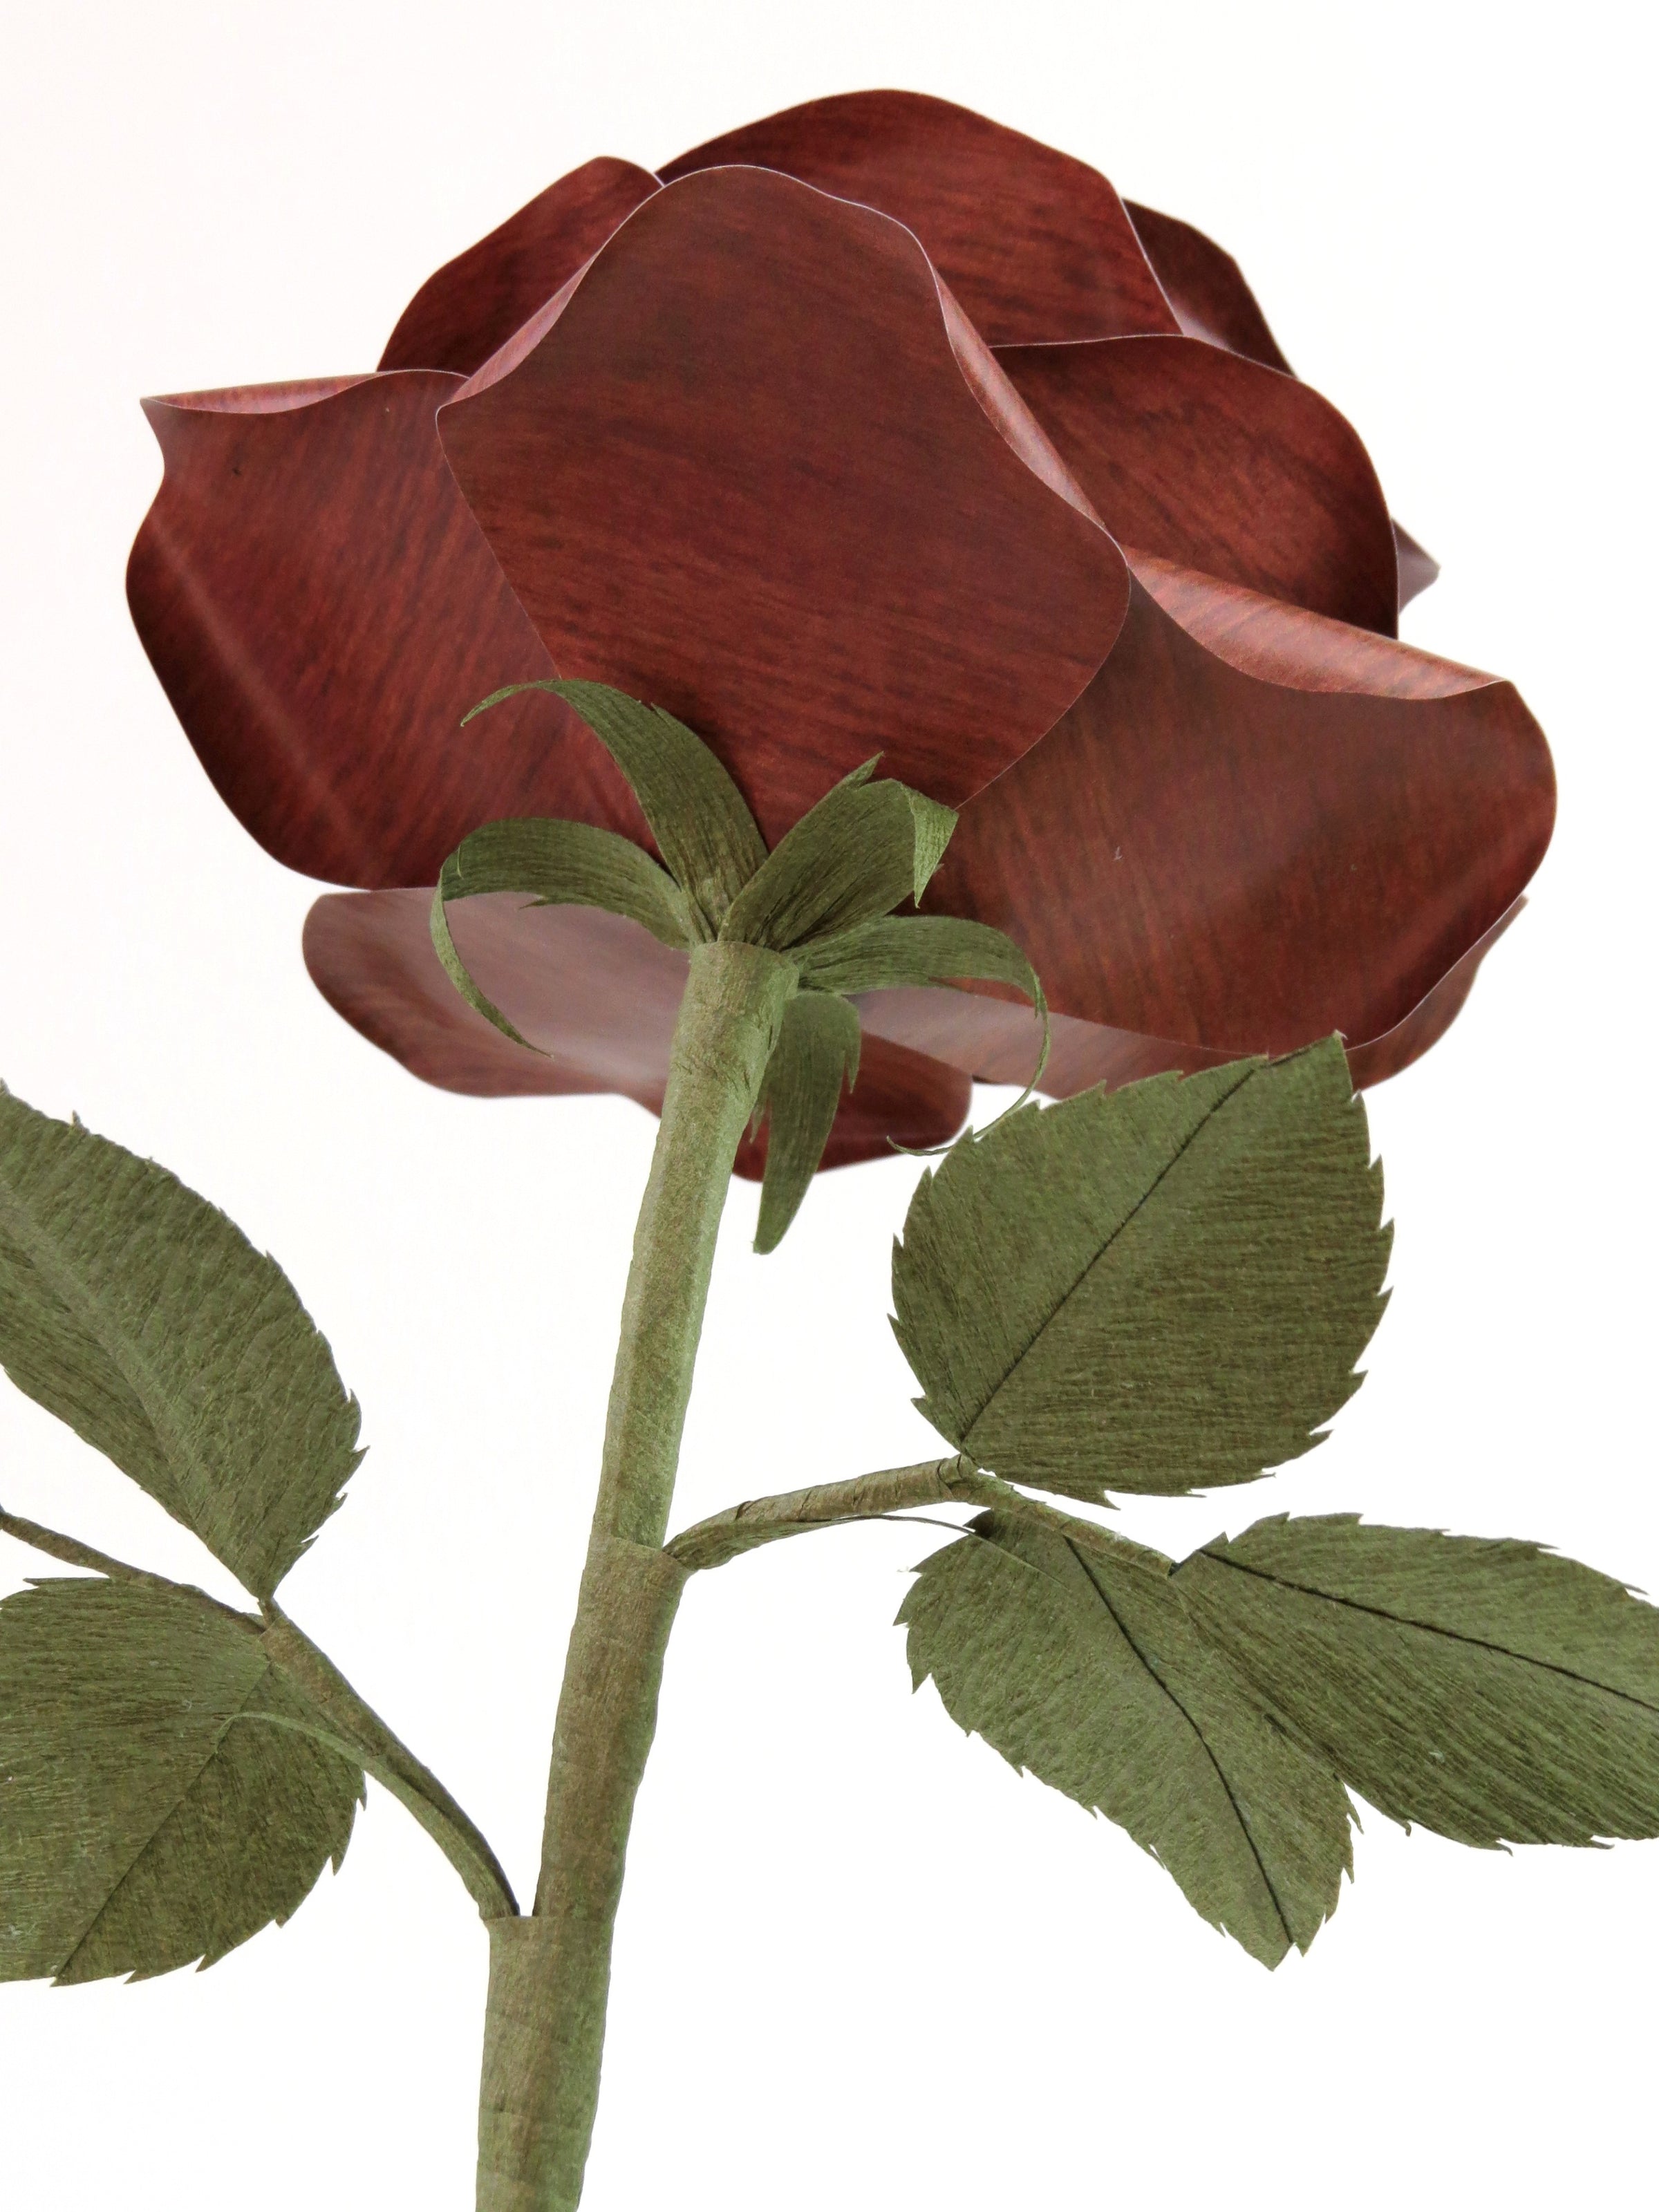 Detailed view of the back of a dark wood  grain paper rose with an olive green curled calyx underneath the dark brown petals, and the green stem and leaves just in view